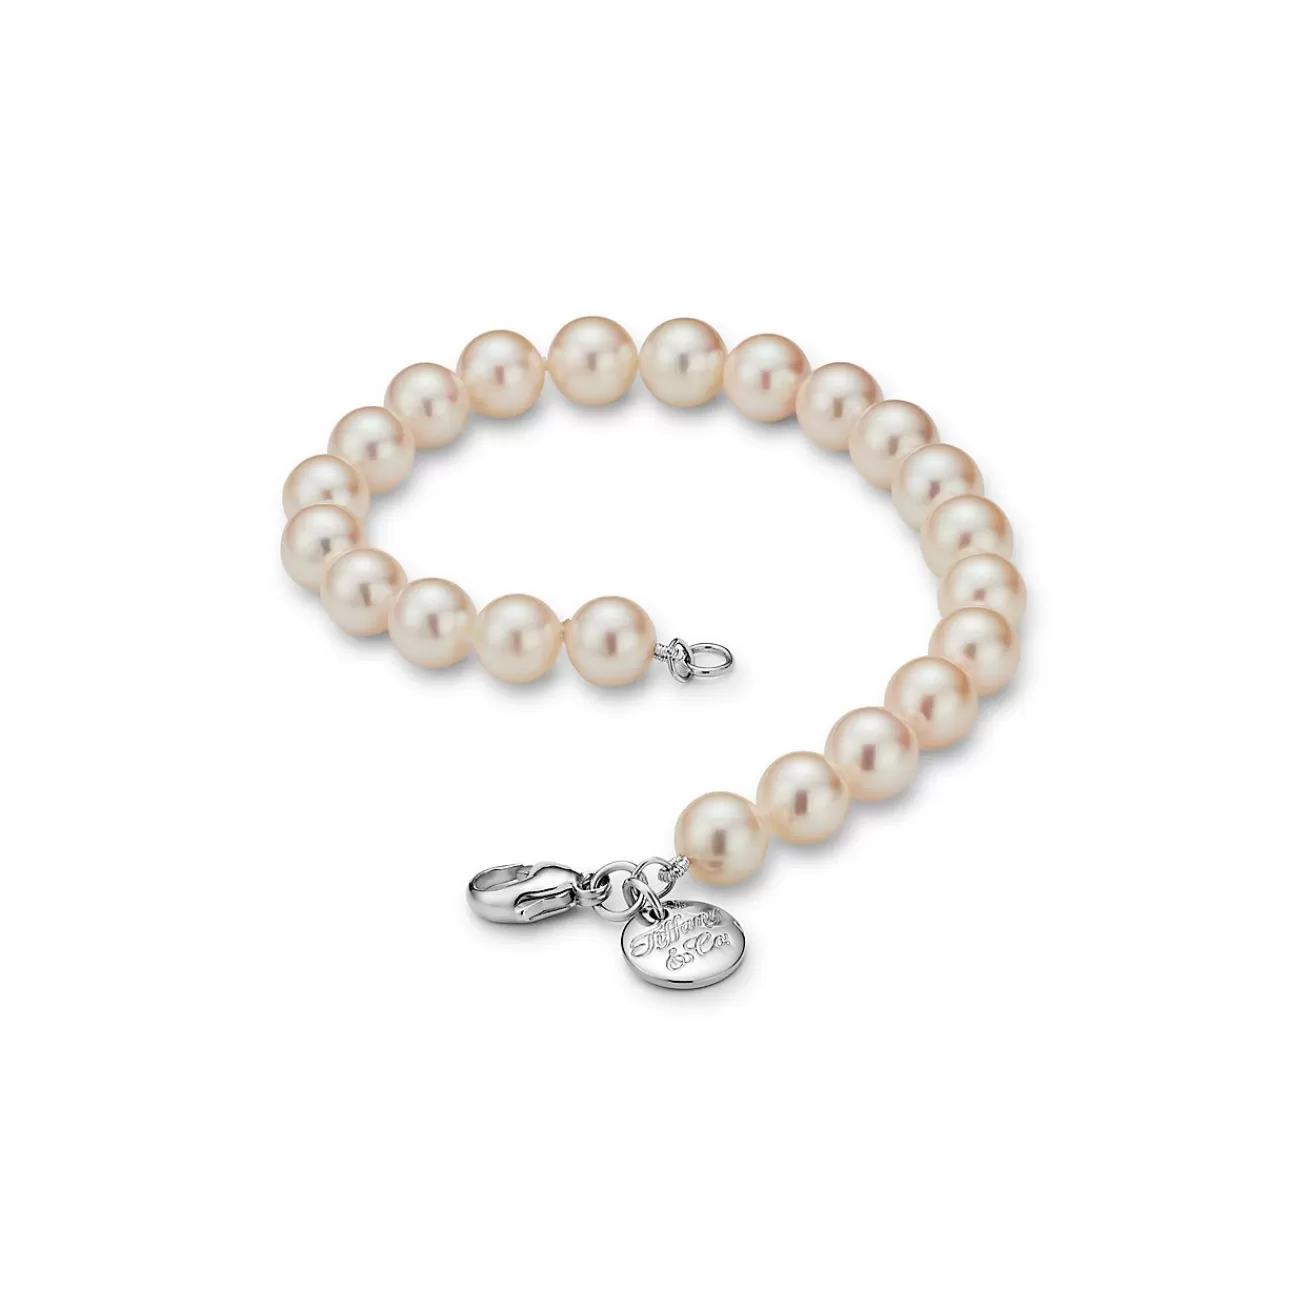 Tiffany & Co. Tiffany Essential Pearls bracelet of Akoya pearls with an 18k white gold clasp. | ^ Bracelets | Gold Jewelry